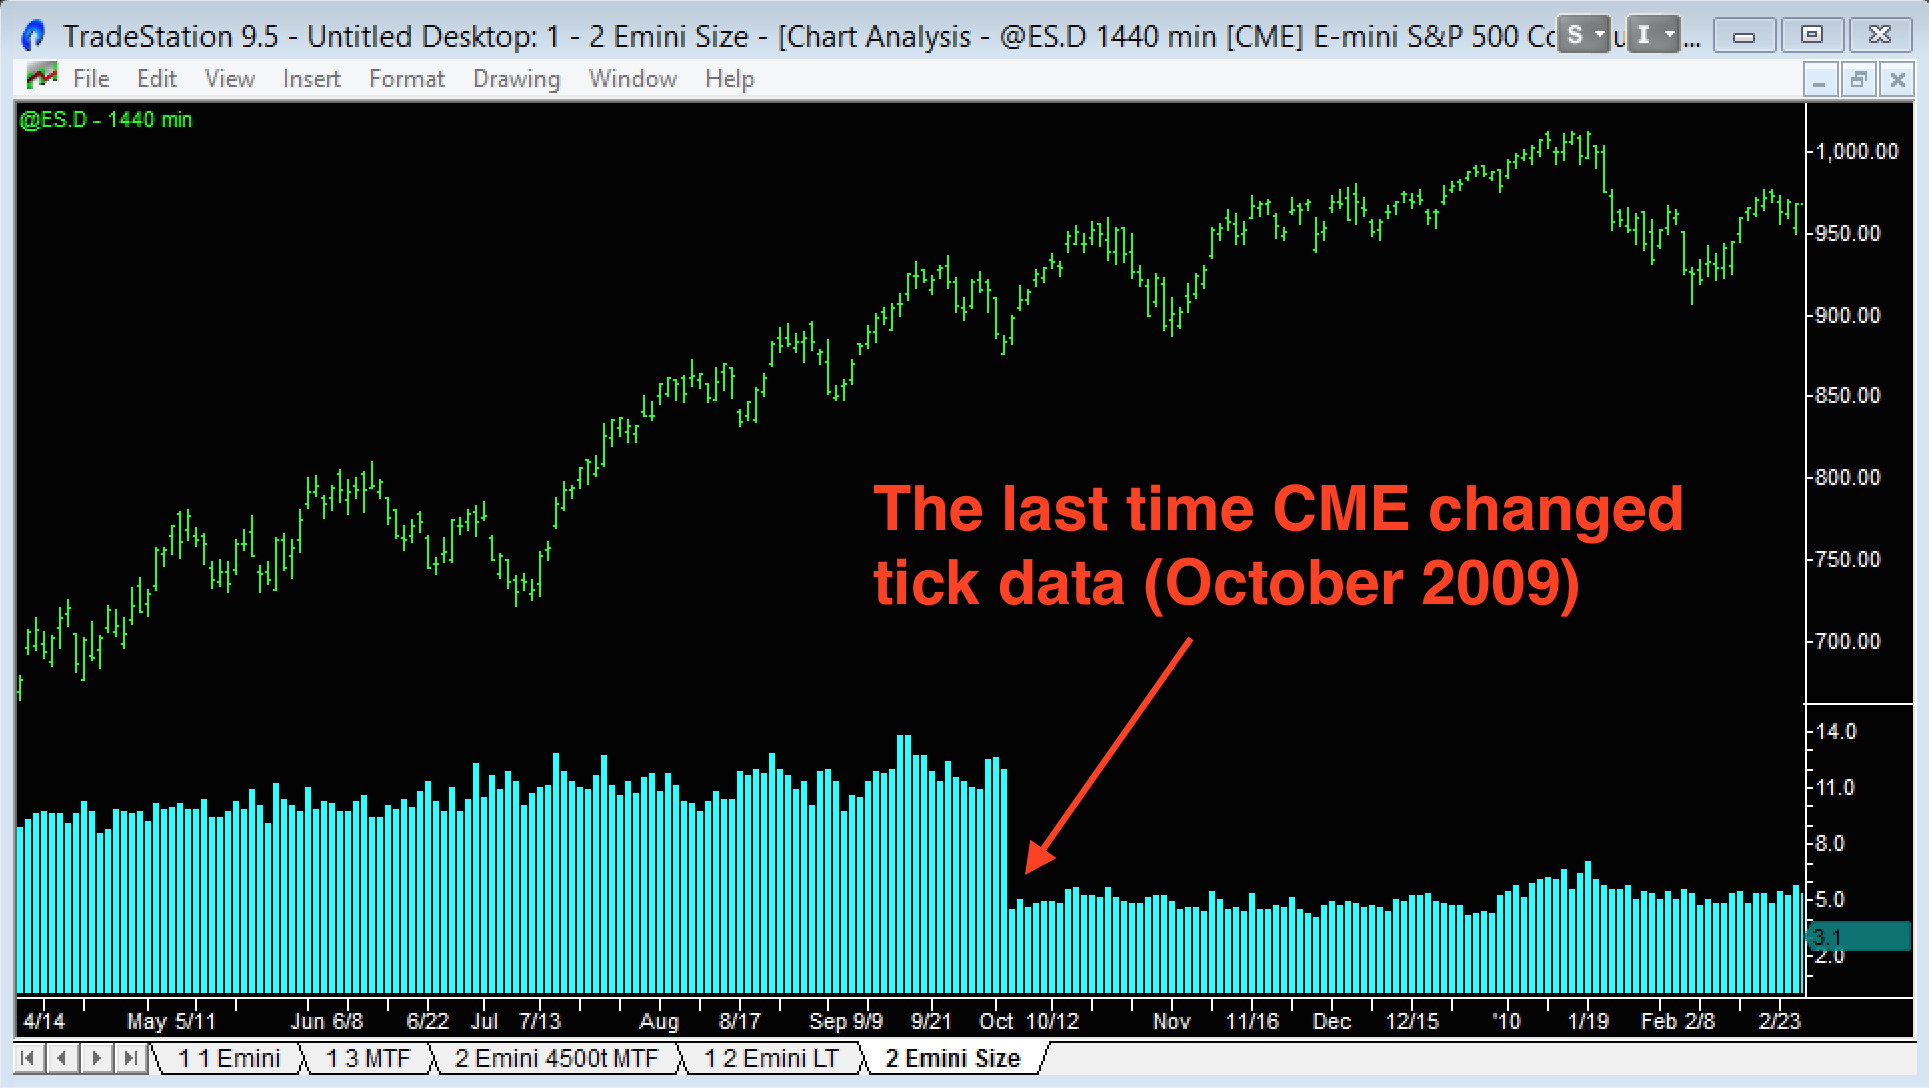 tick chart settings needed to be recalculated after the CME changes in October 2009